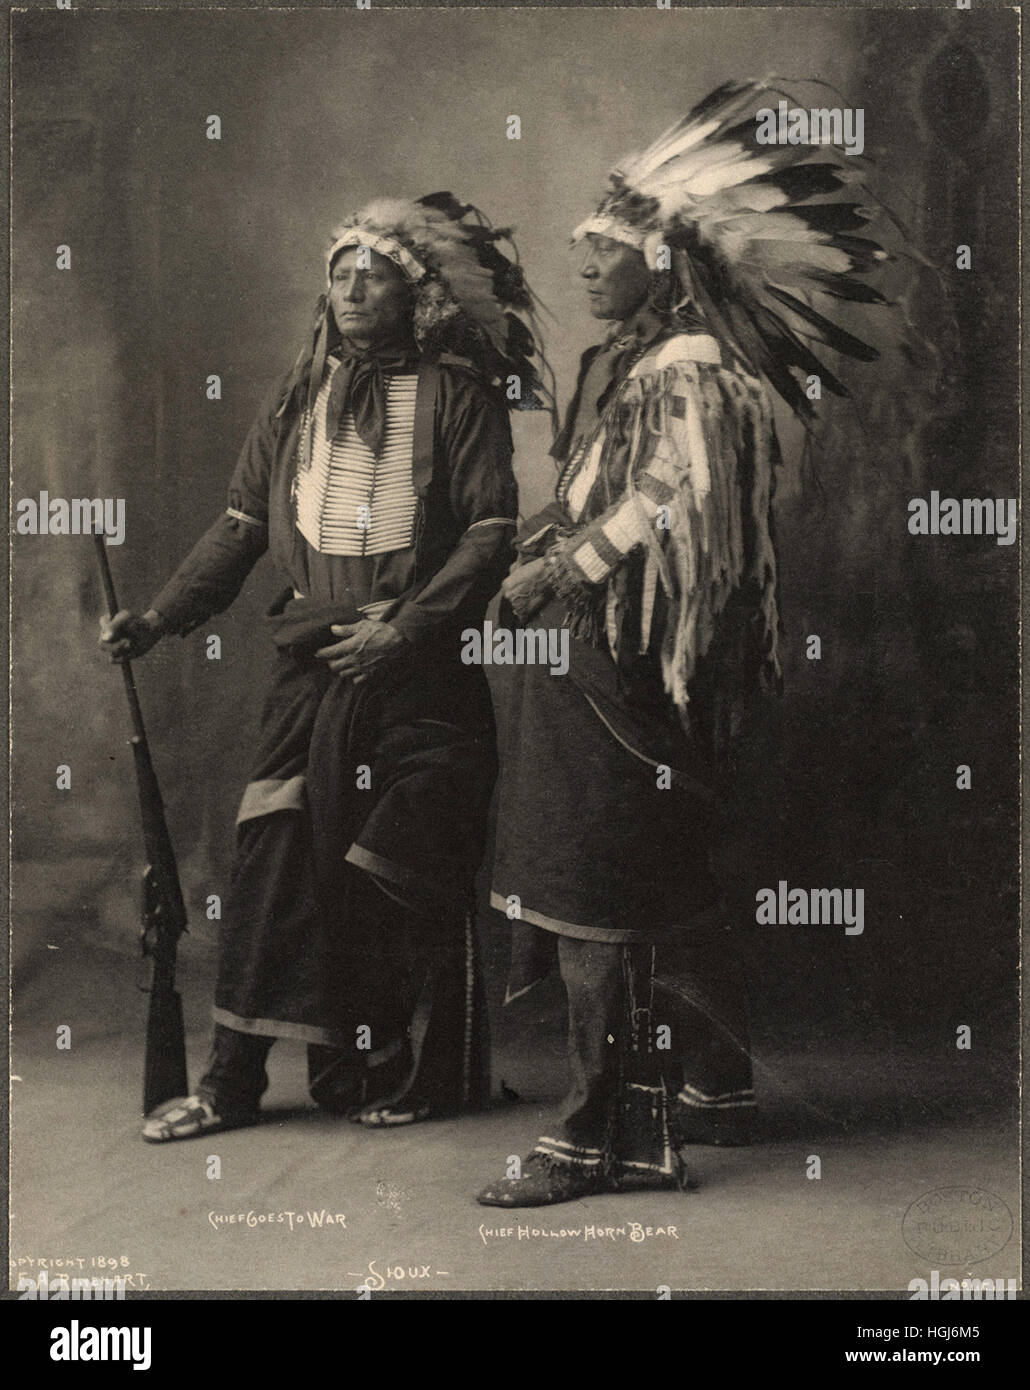 Chef Goes to War, chef sioux, Ours corne creuse - 1898 Indian Congress - Photo : Frank A. Rinehart Banque D'Images